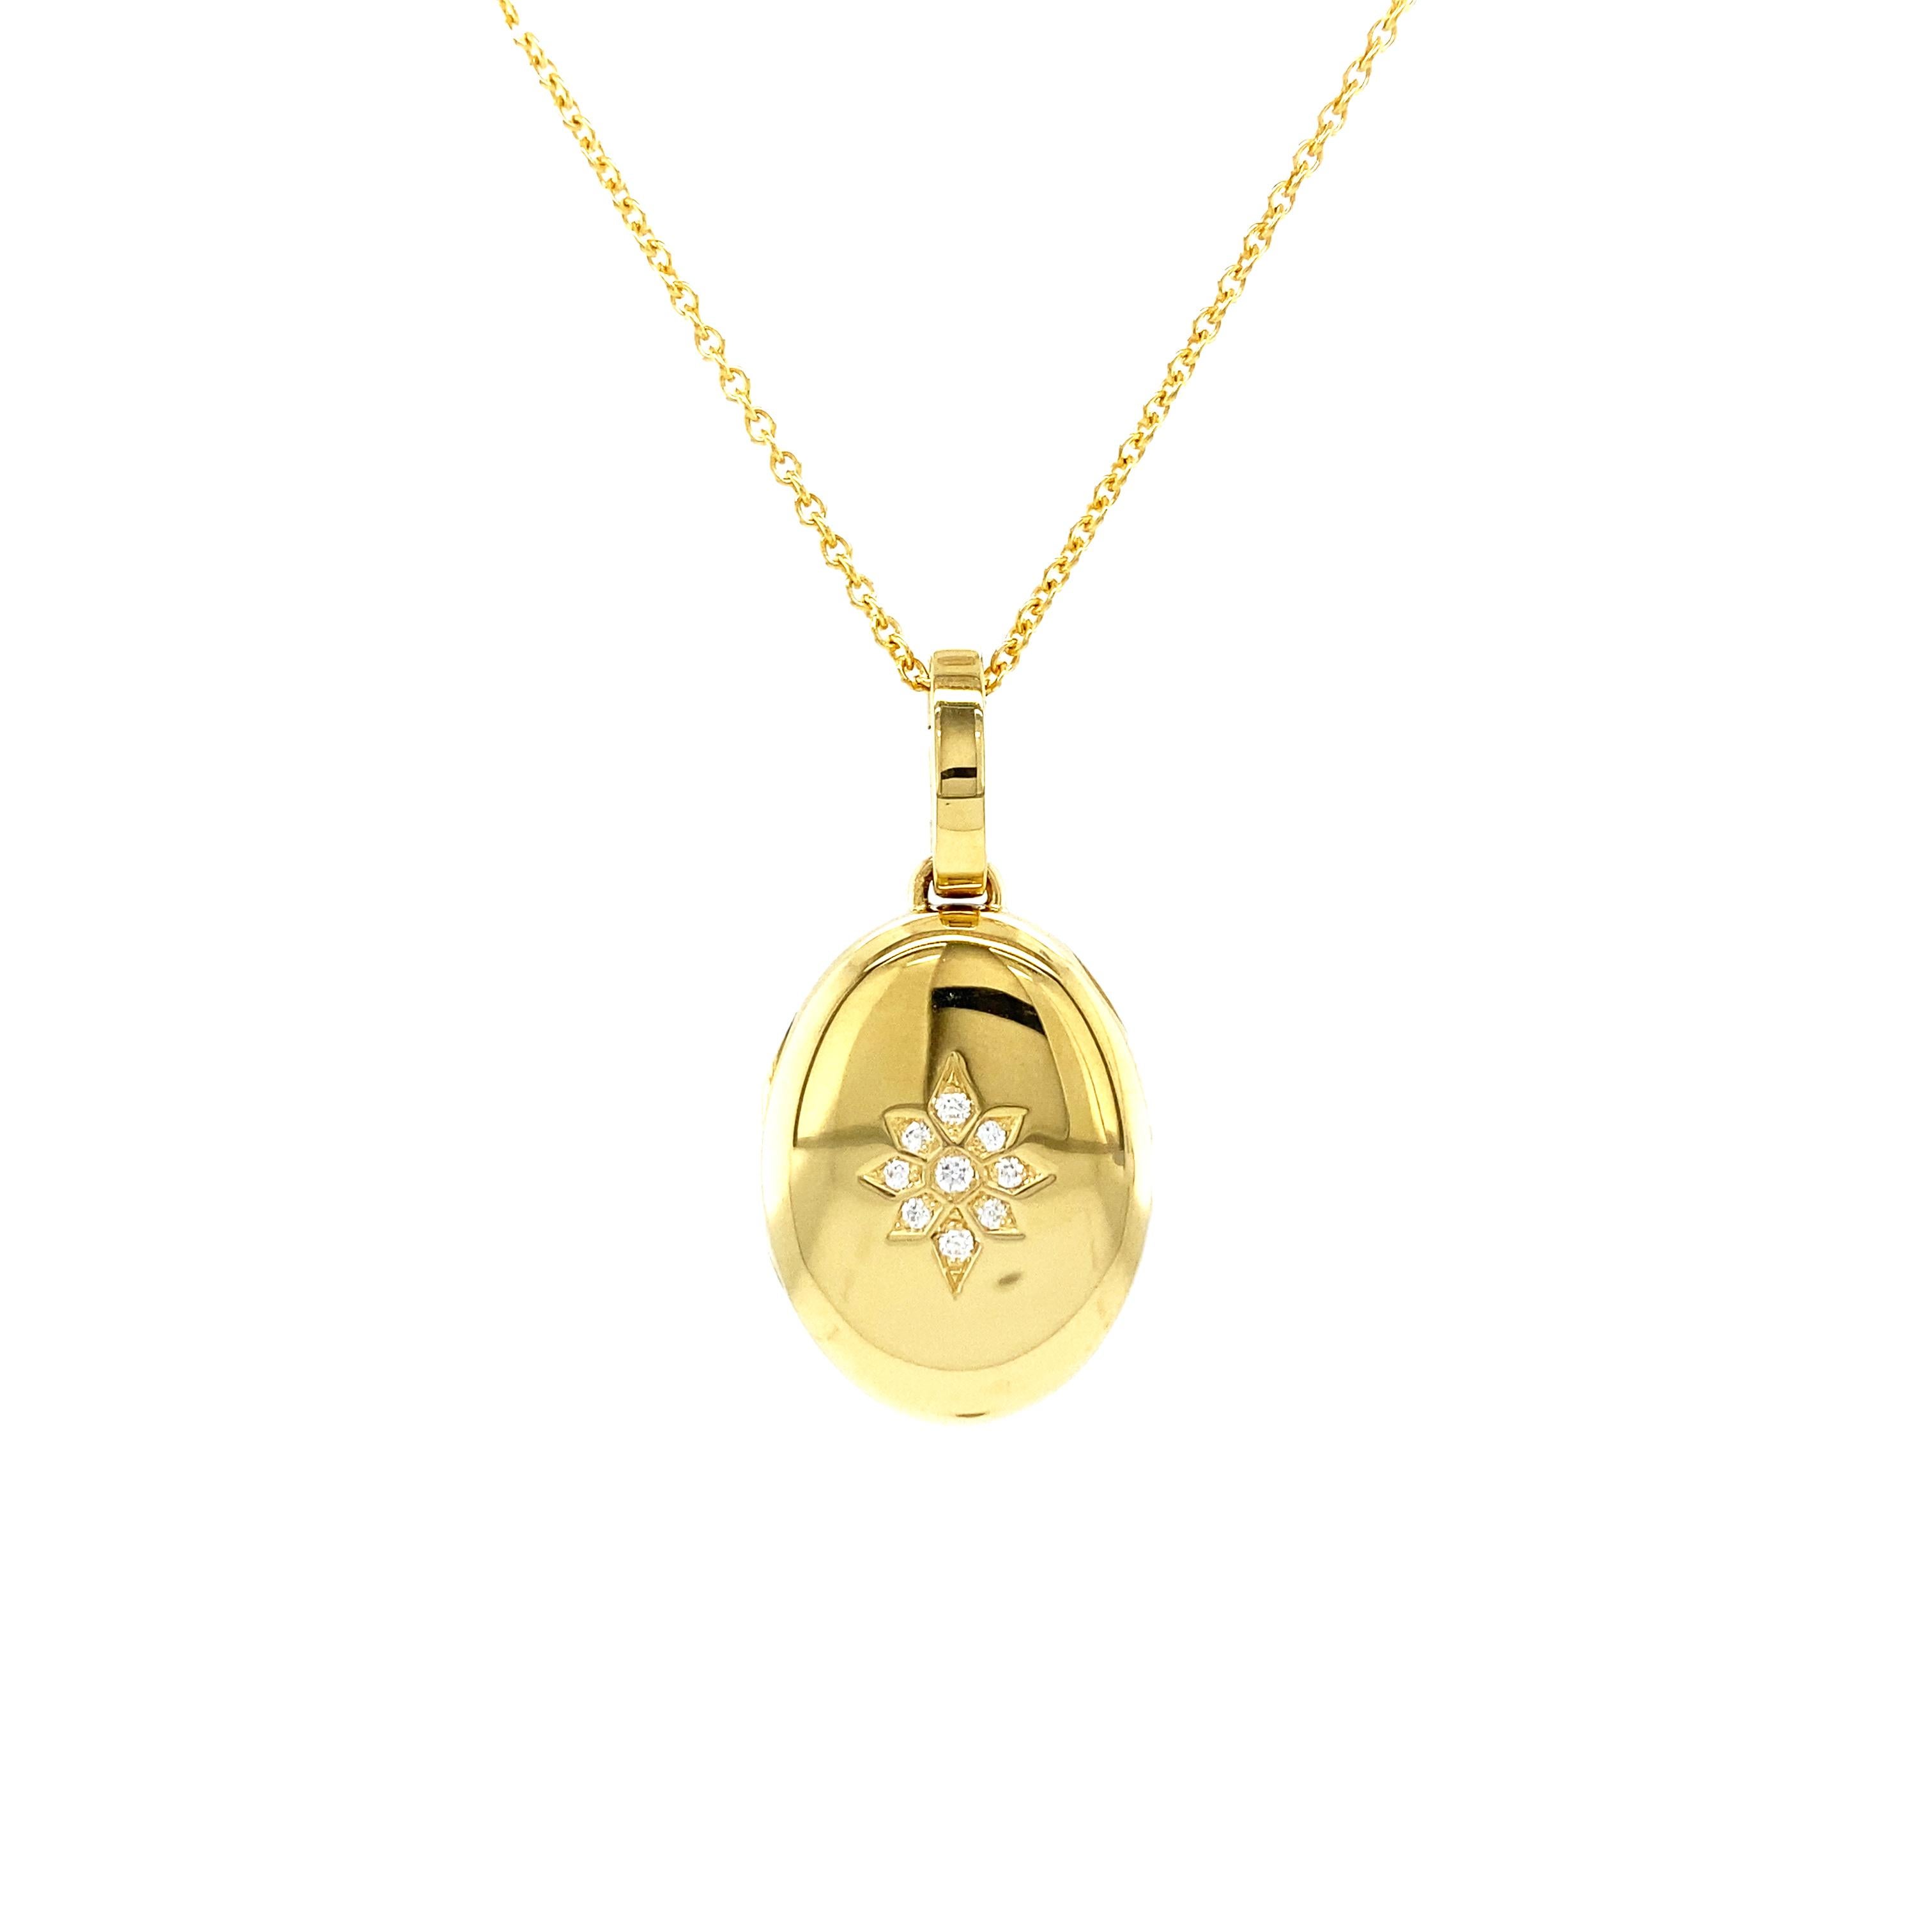 Heavy Oval Locket Pendant Necklace 18k Yellow Gold  Star Motif with 9 Diamonds In New Condition For Sale In Pforzheim, DE